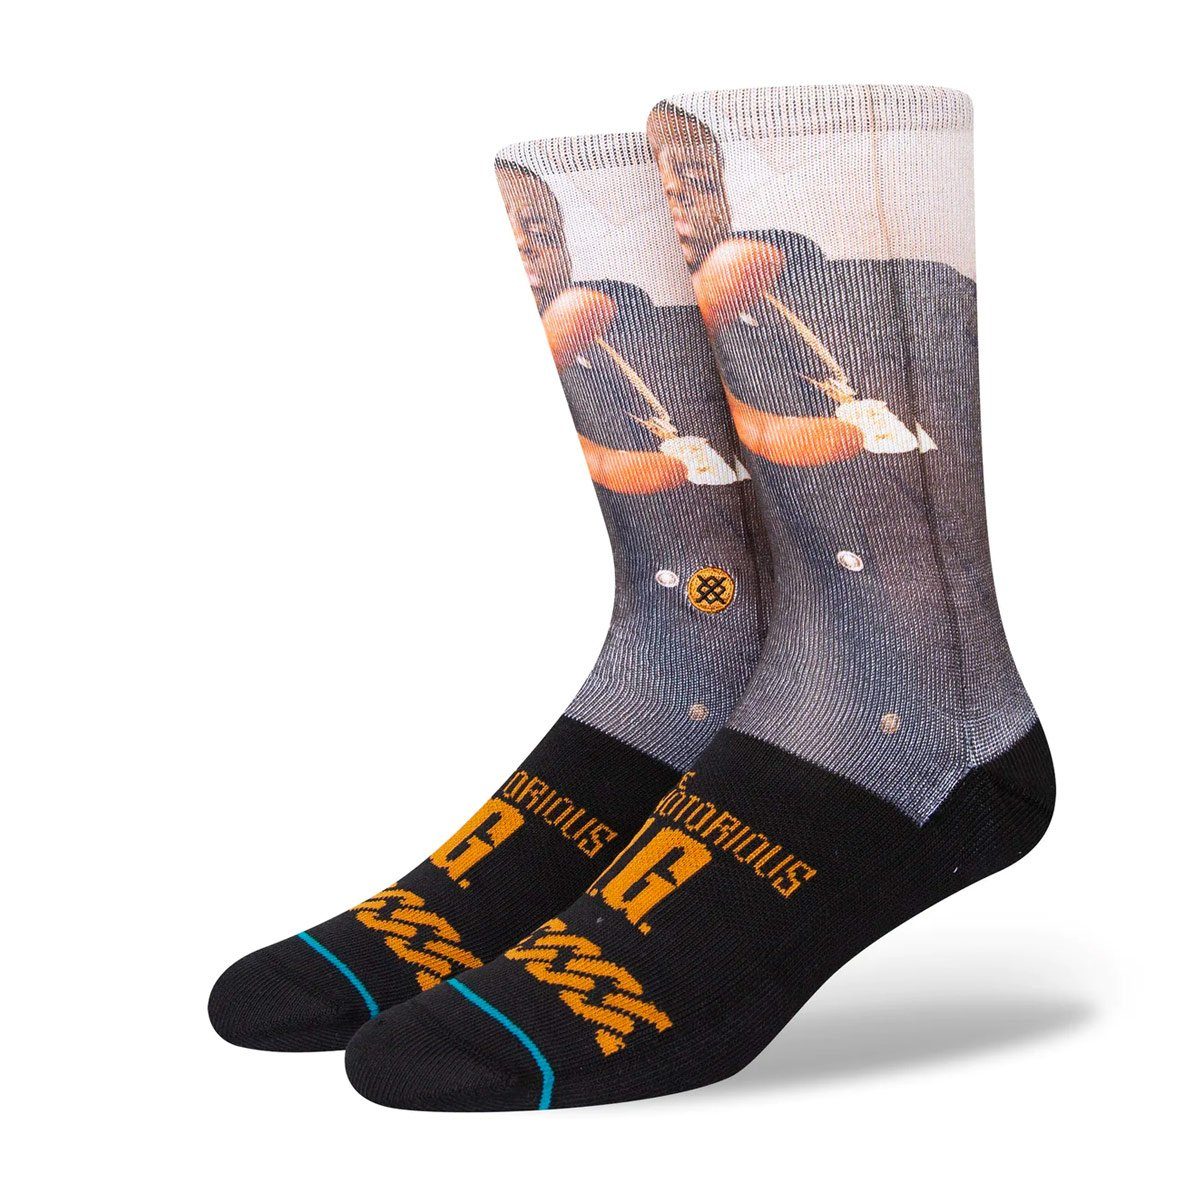 Stance Freizeitsocken black Notorious Paar) Stance x (1 B.I.G. The King NY Of - The